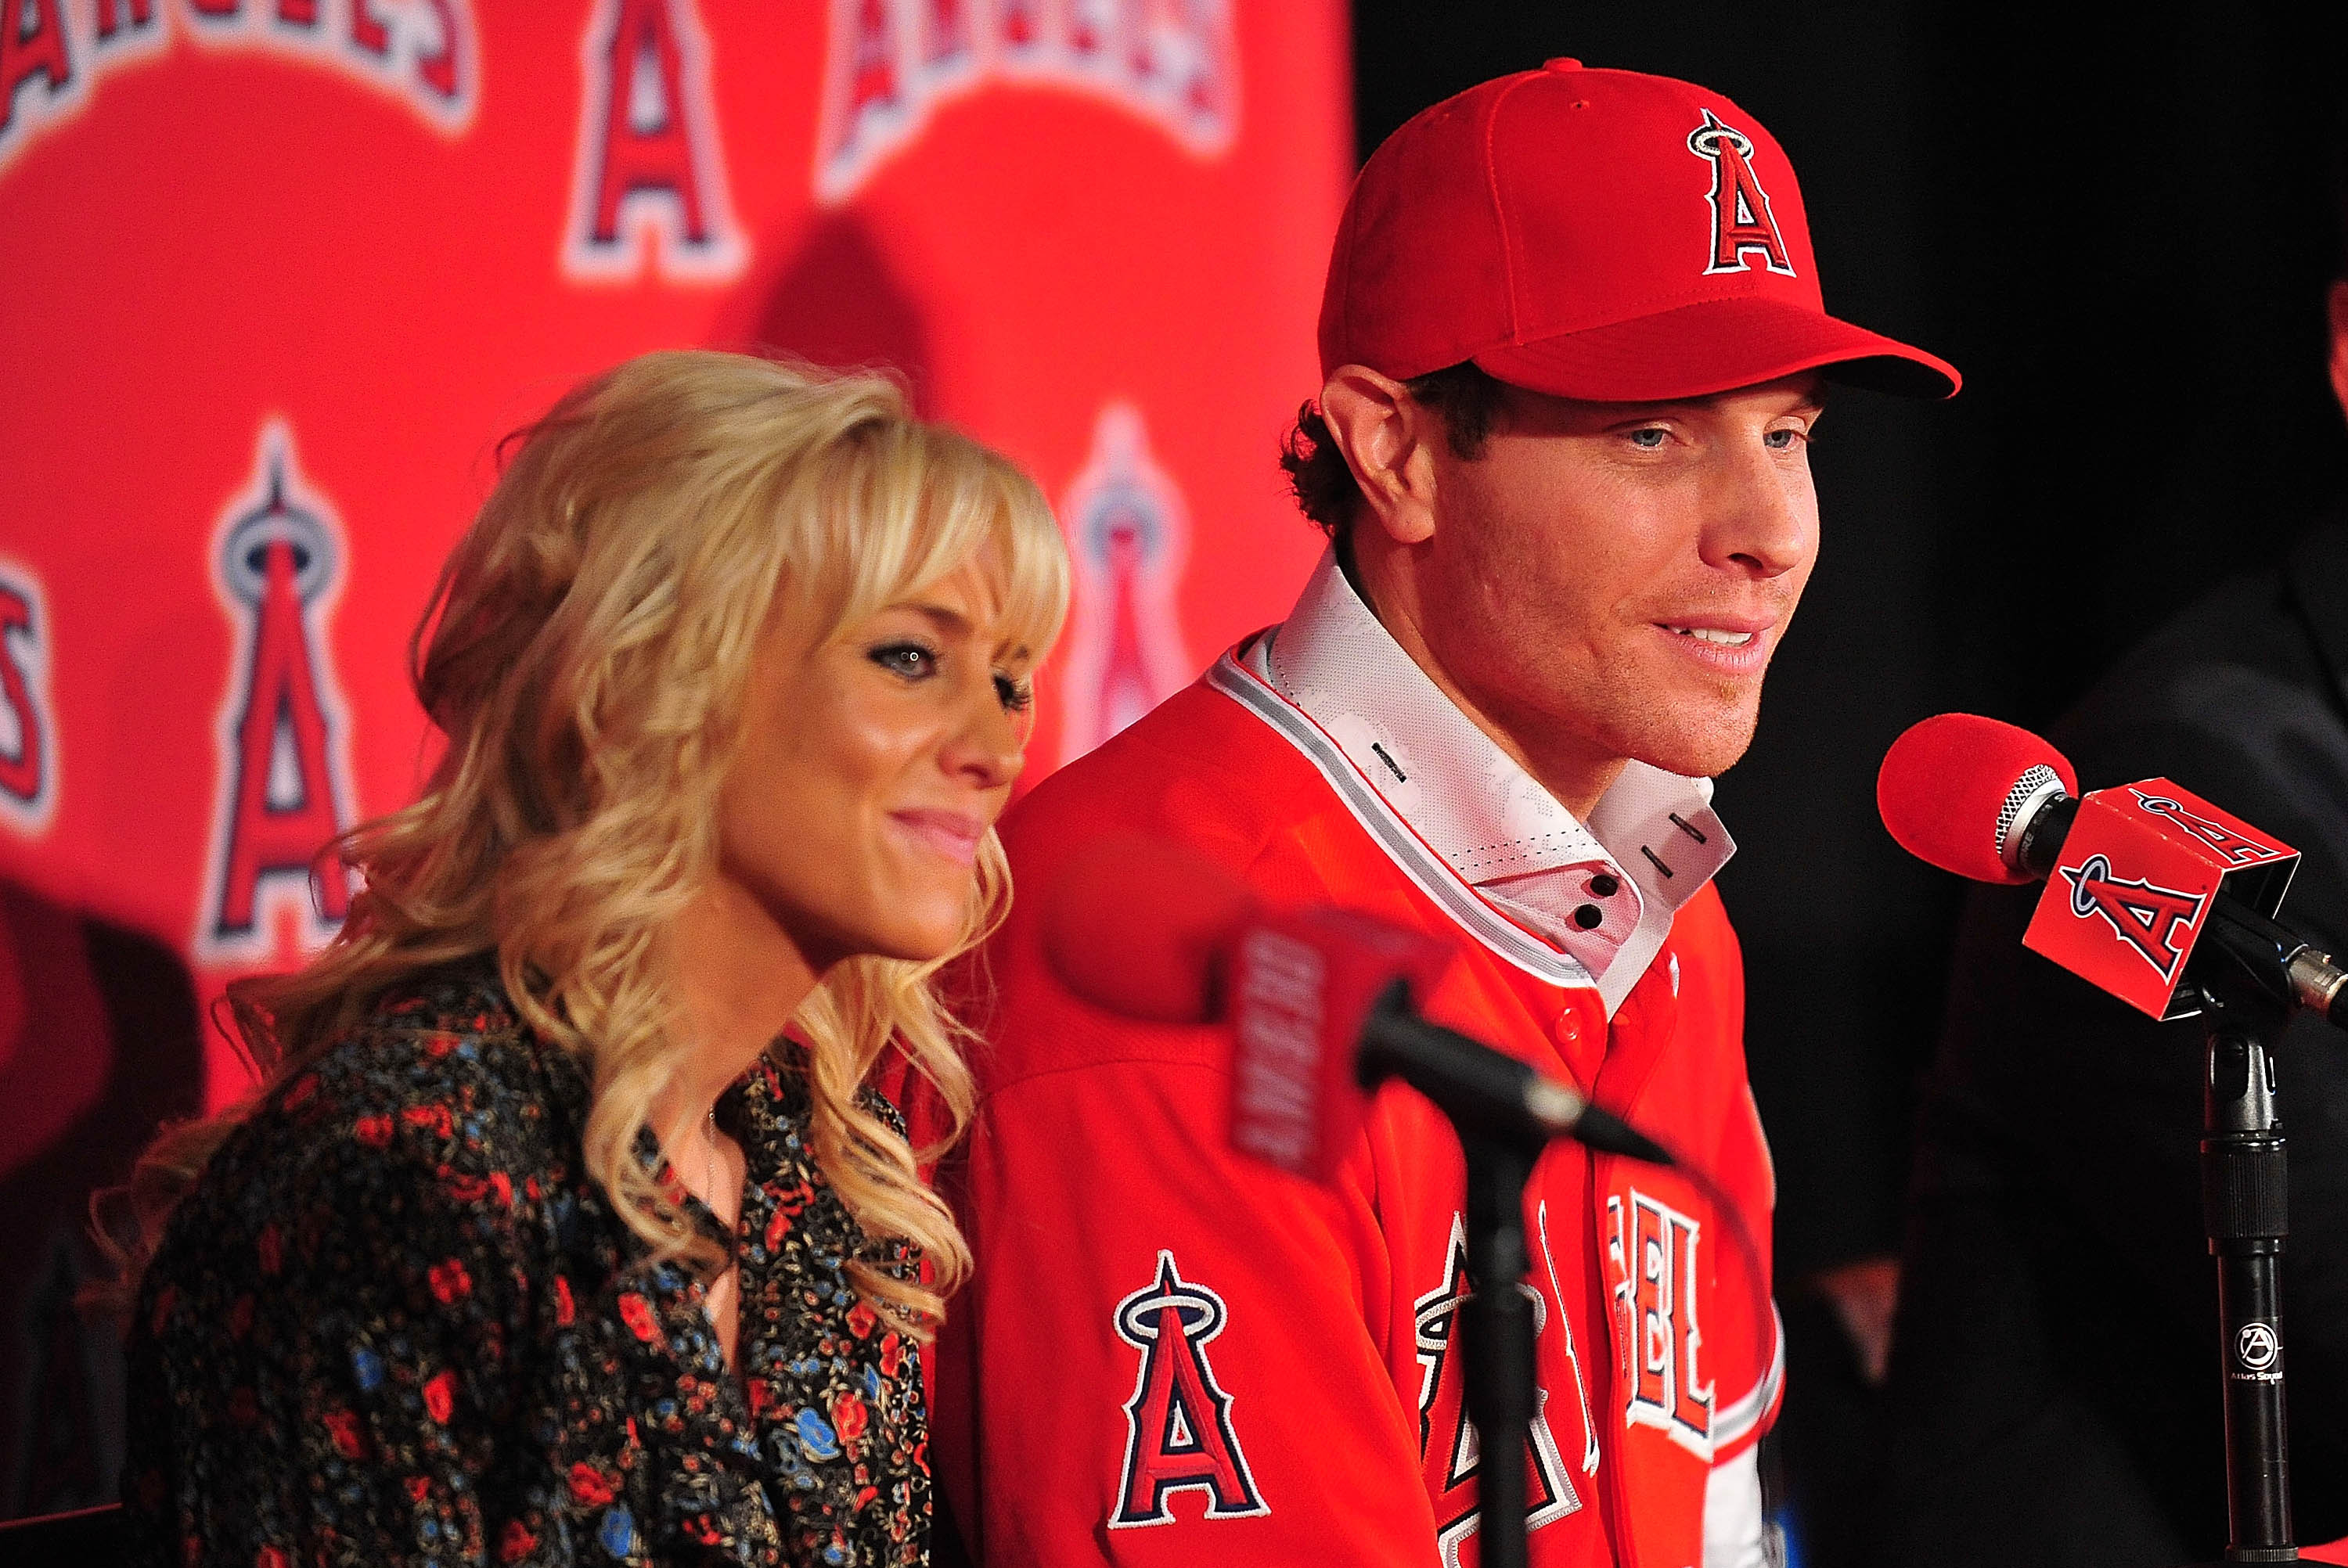 Josh Hamilton's Wife Had to Call Security in Star's Return to